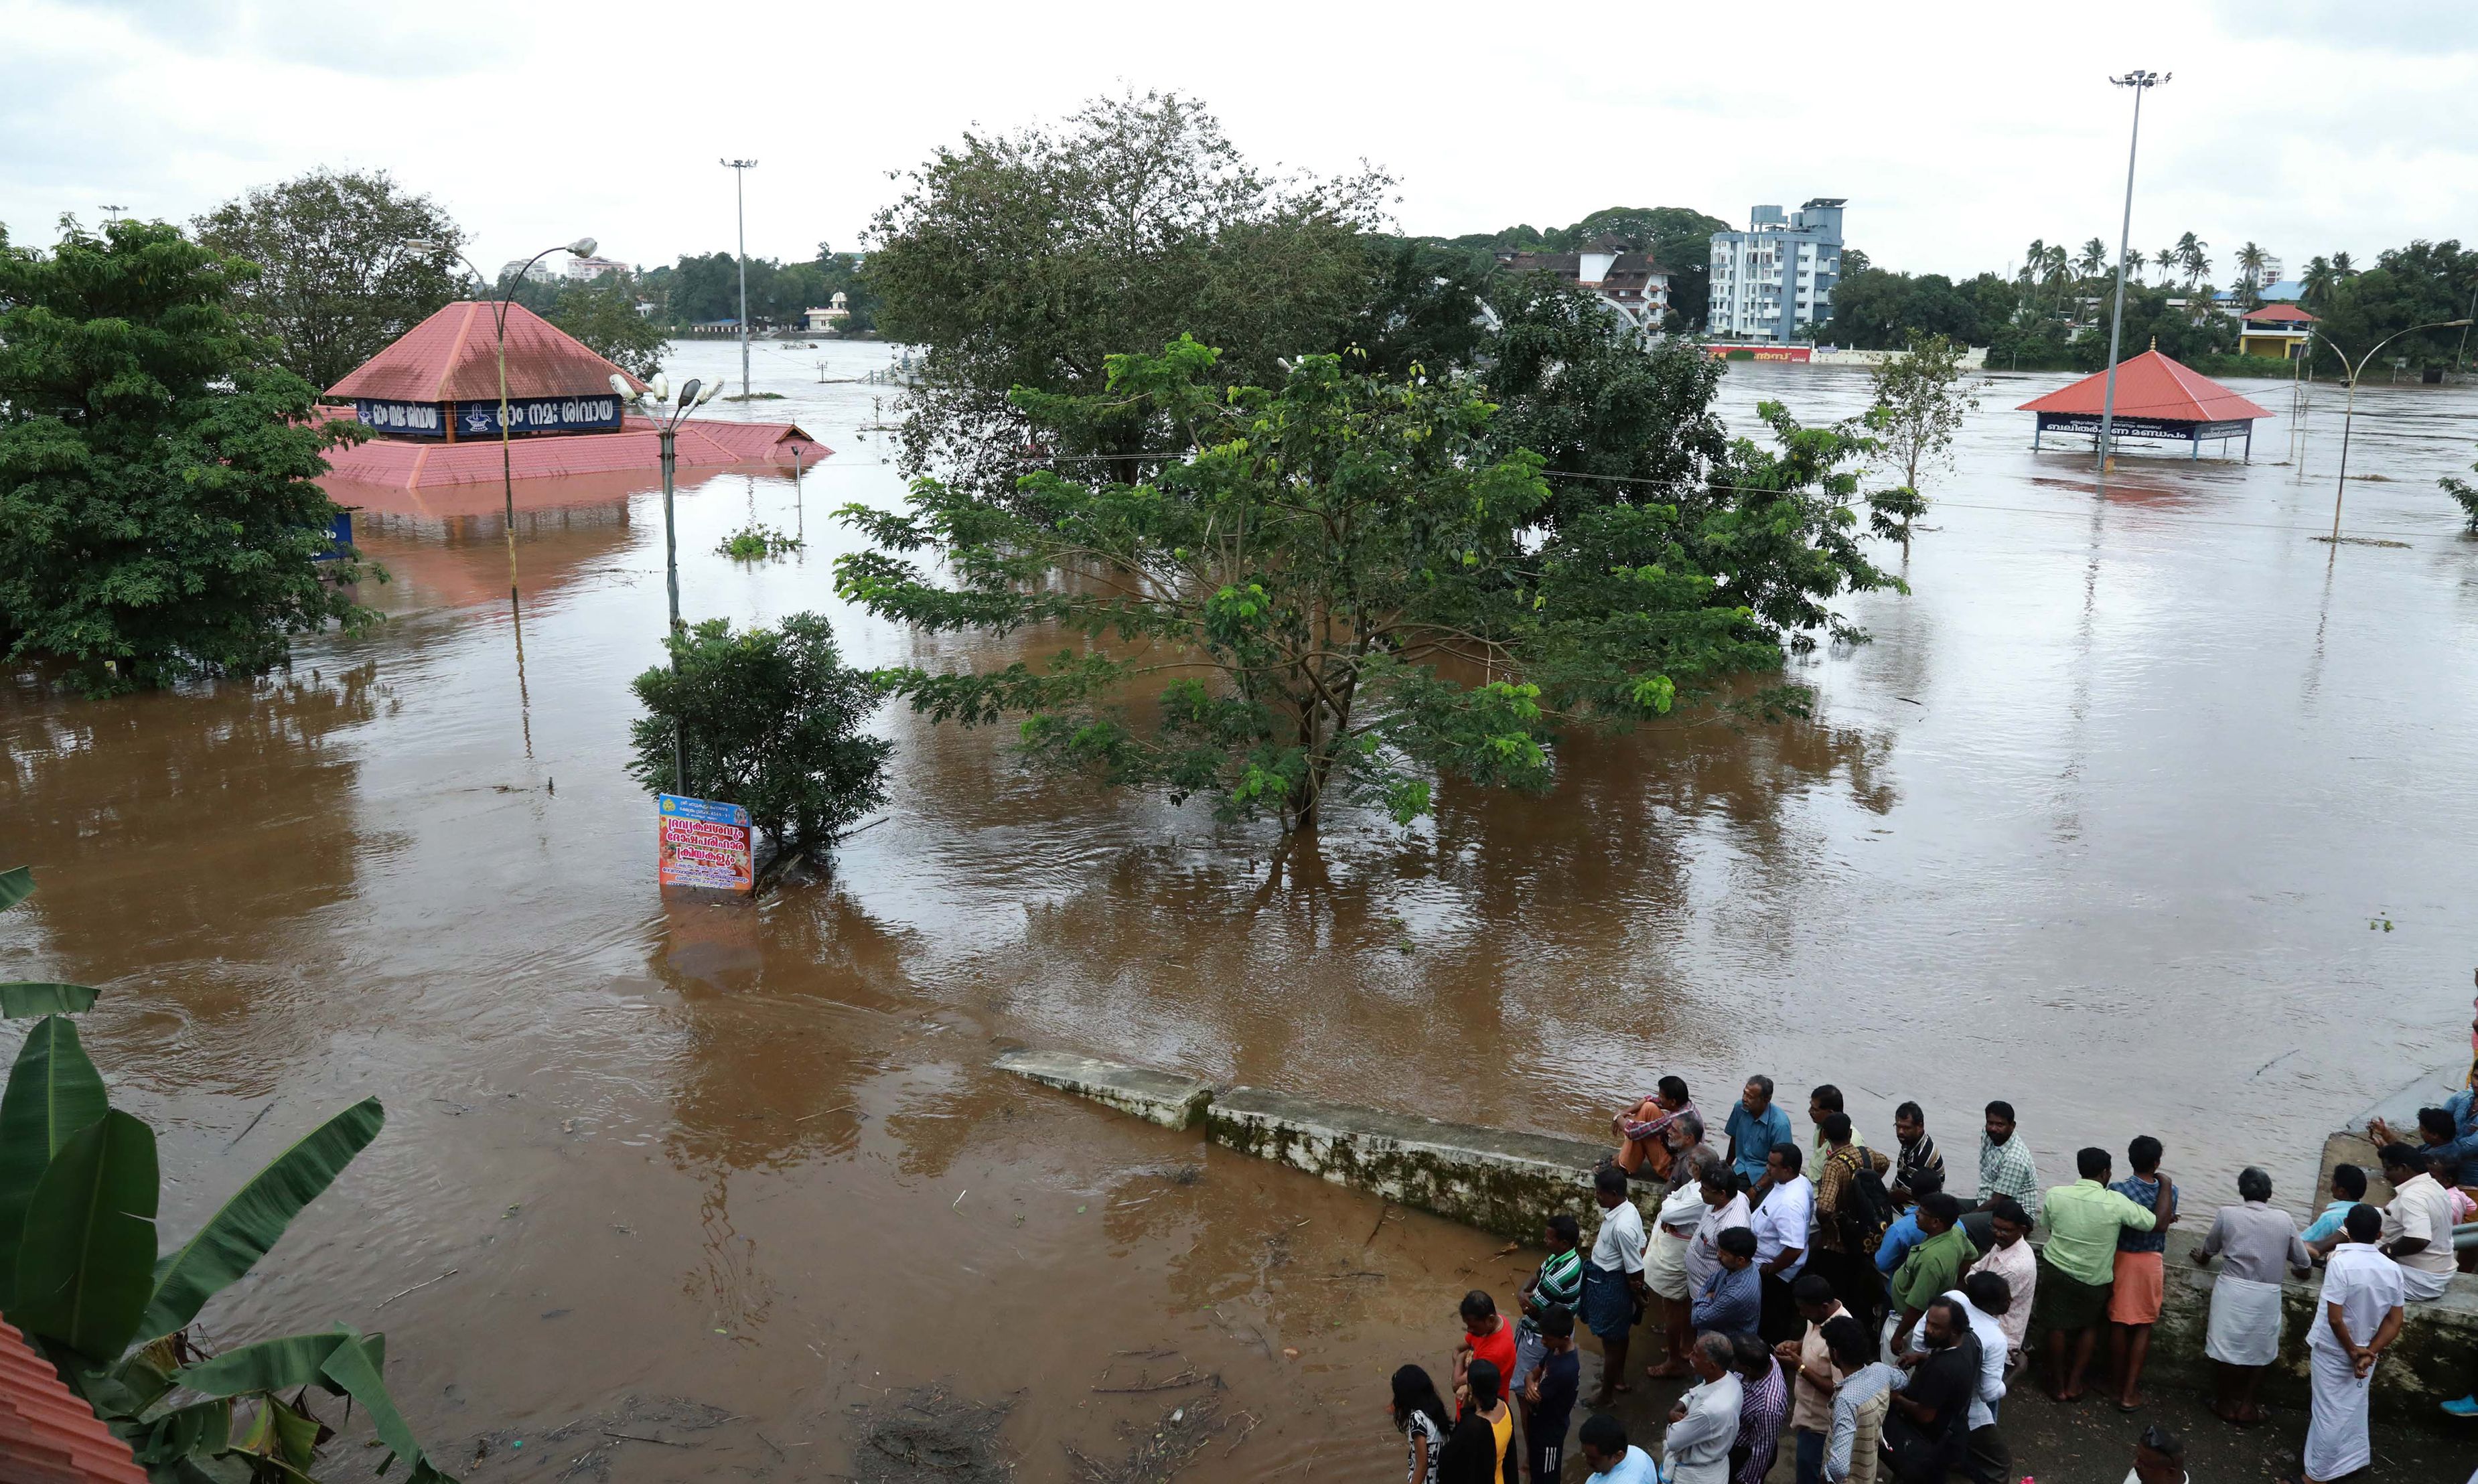 Indian residents look at the Shiva Temple submerged after the release of water from Idamalayar dam following heavy rains in Kochi on Aug. 9, 2018. (AFP/Getty Images)